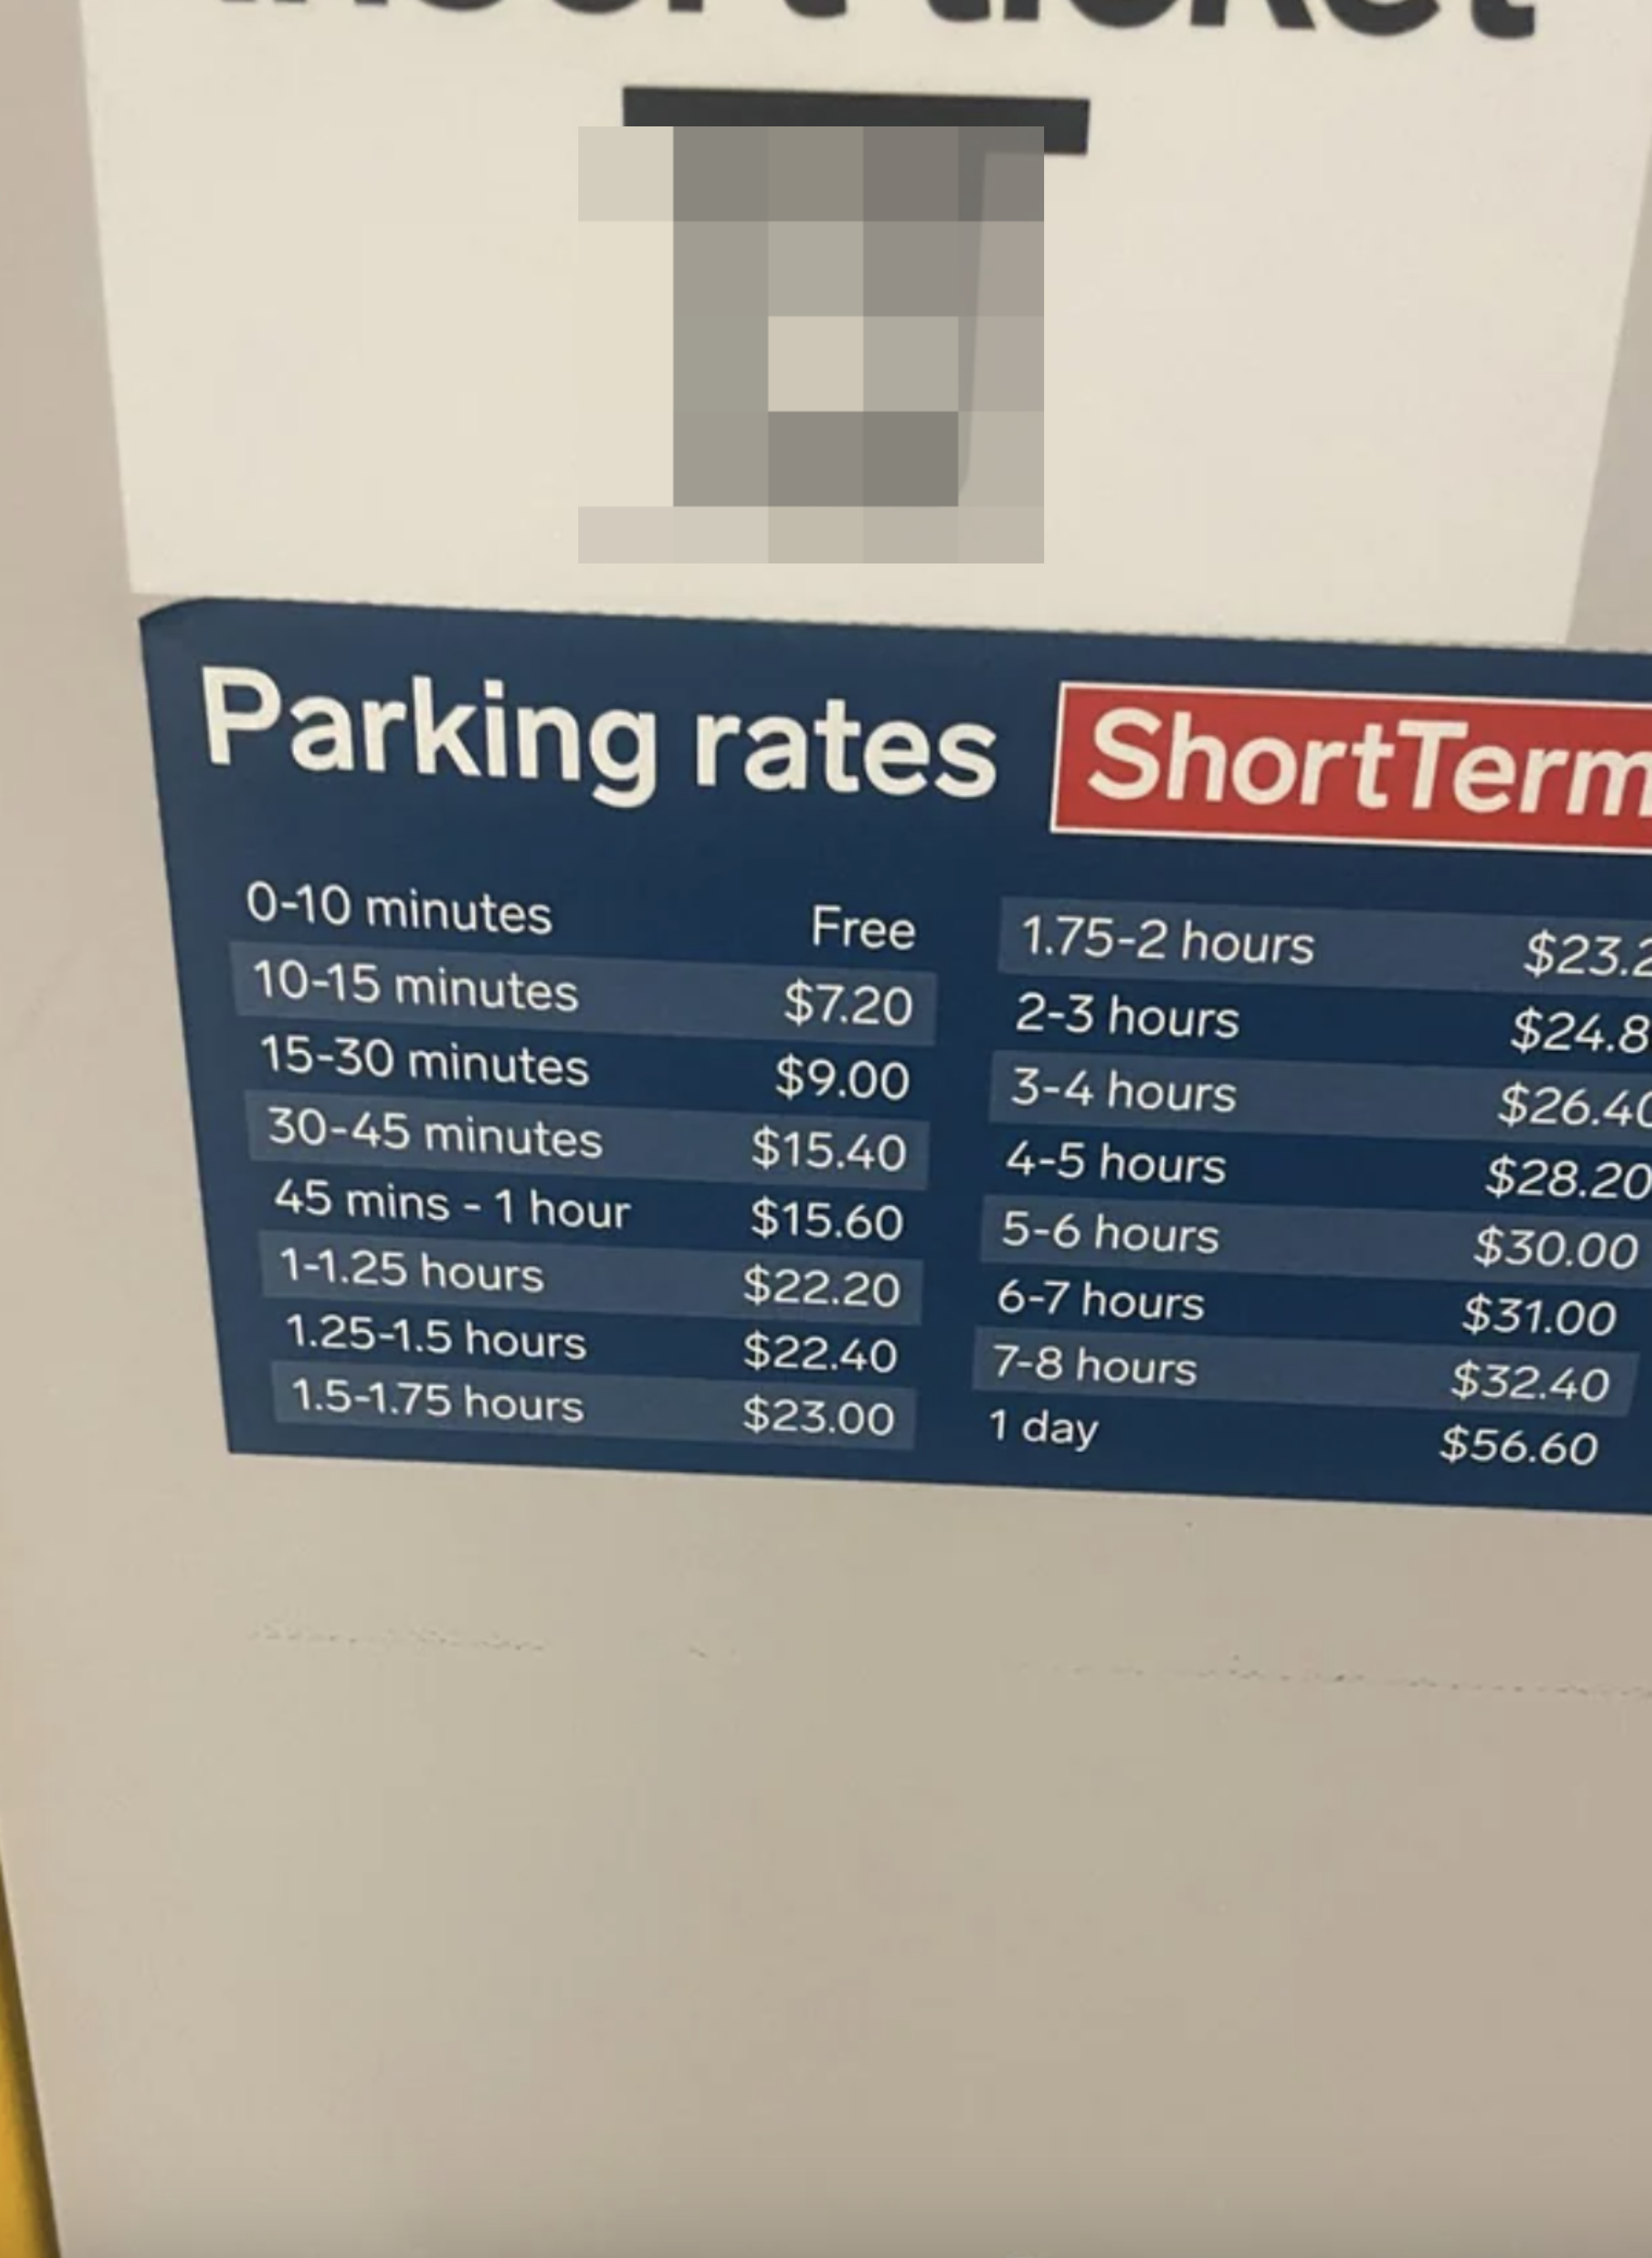 Prices for parking at the airport